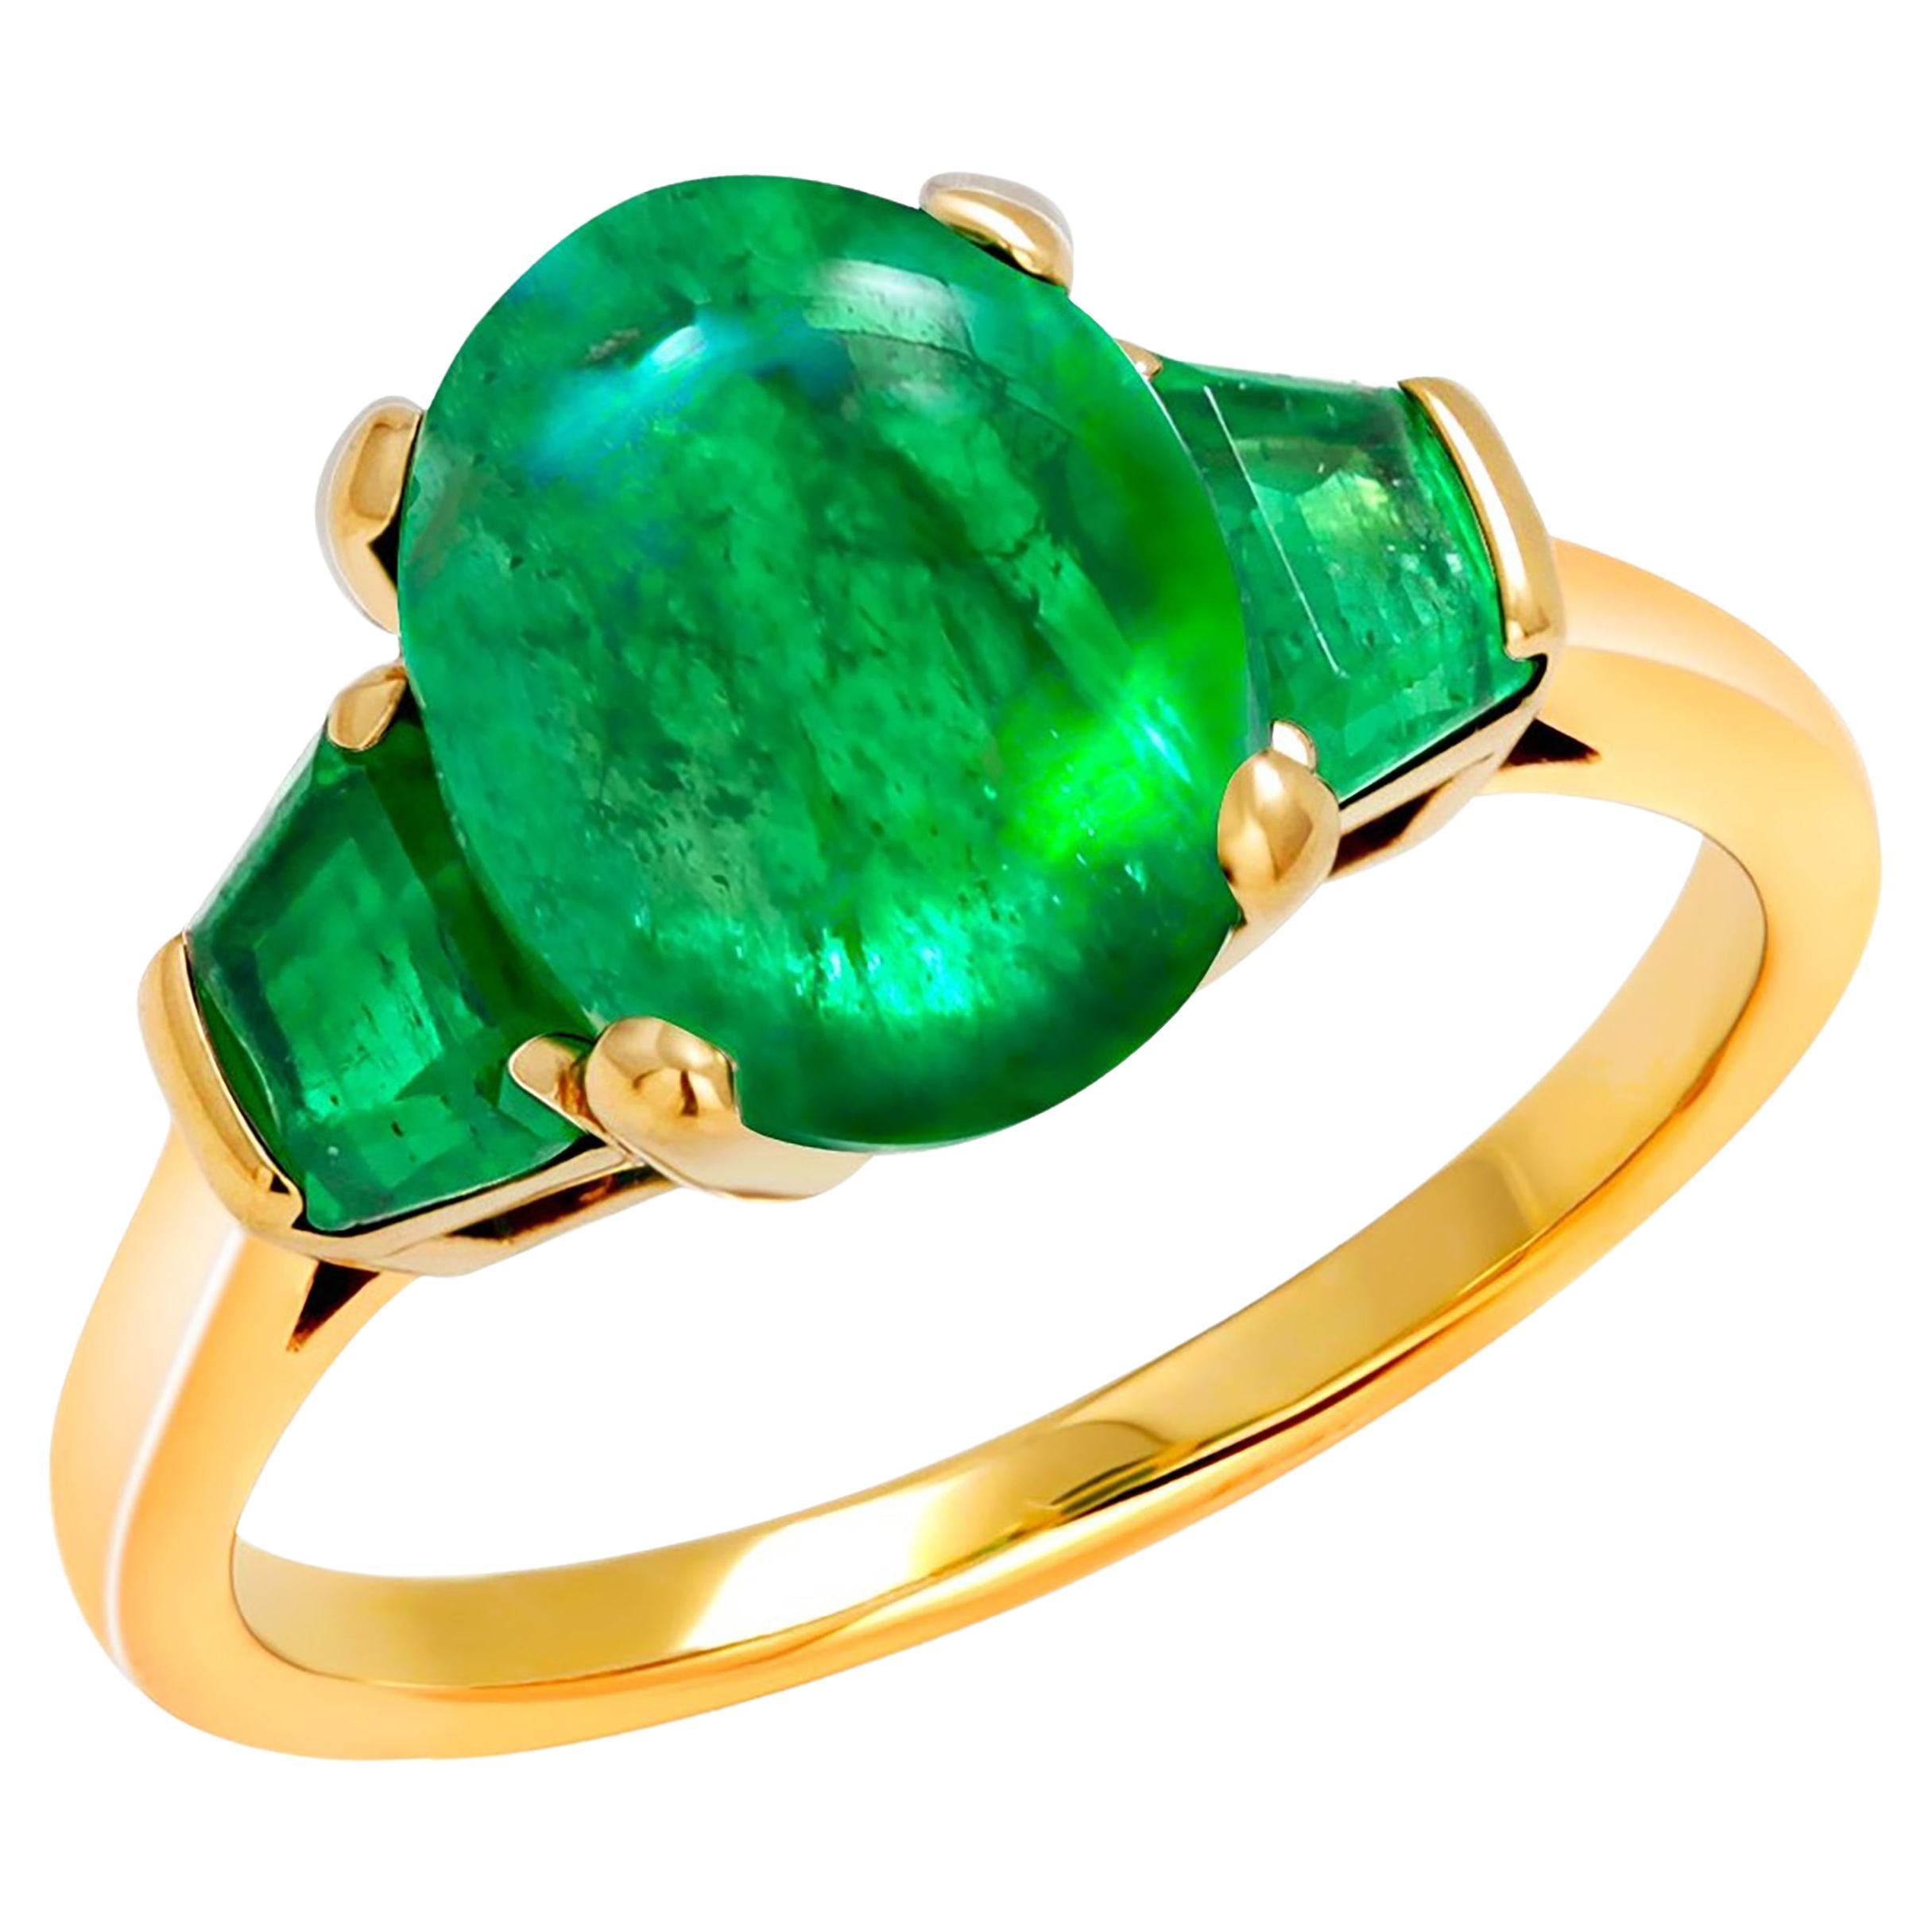 Eighteen Karat Gold Cabochon Emerald and Trapezoid Shaped Emerald Cocktail Ring